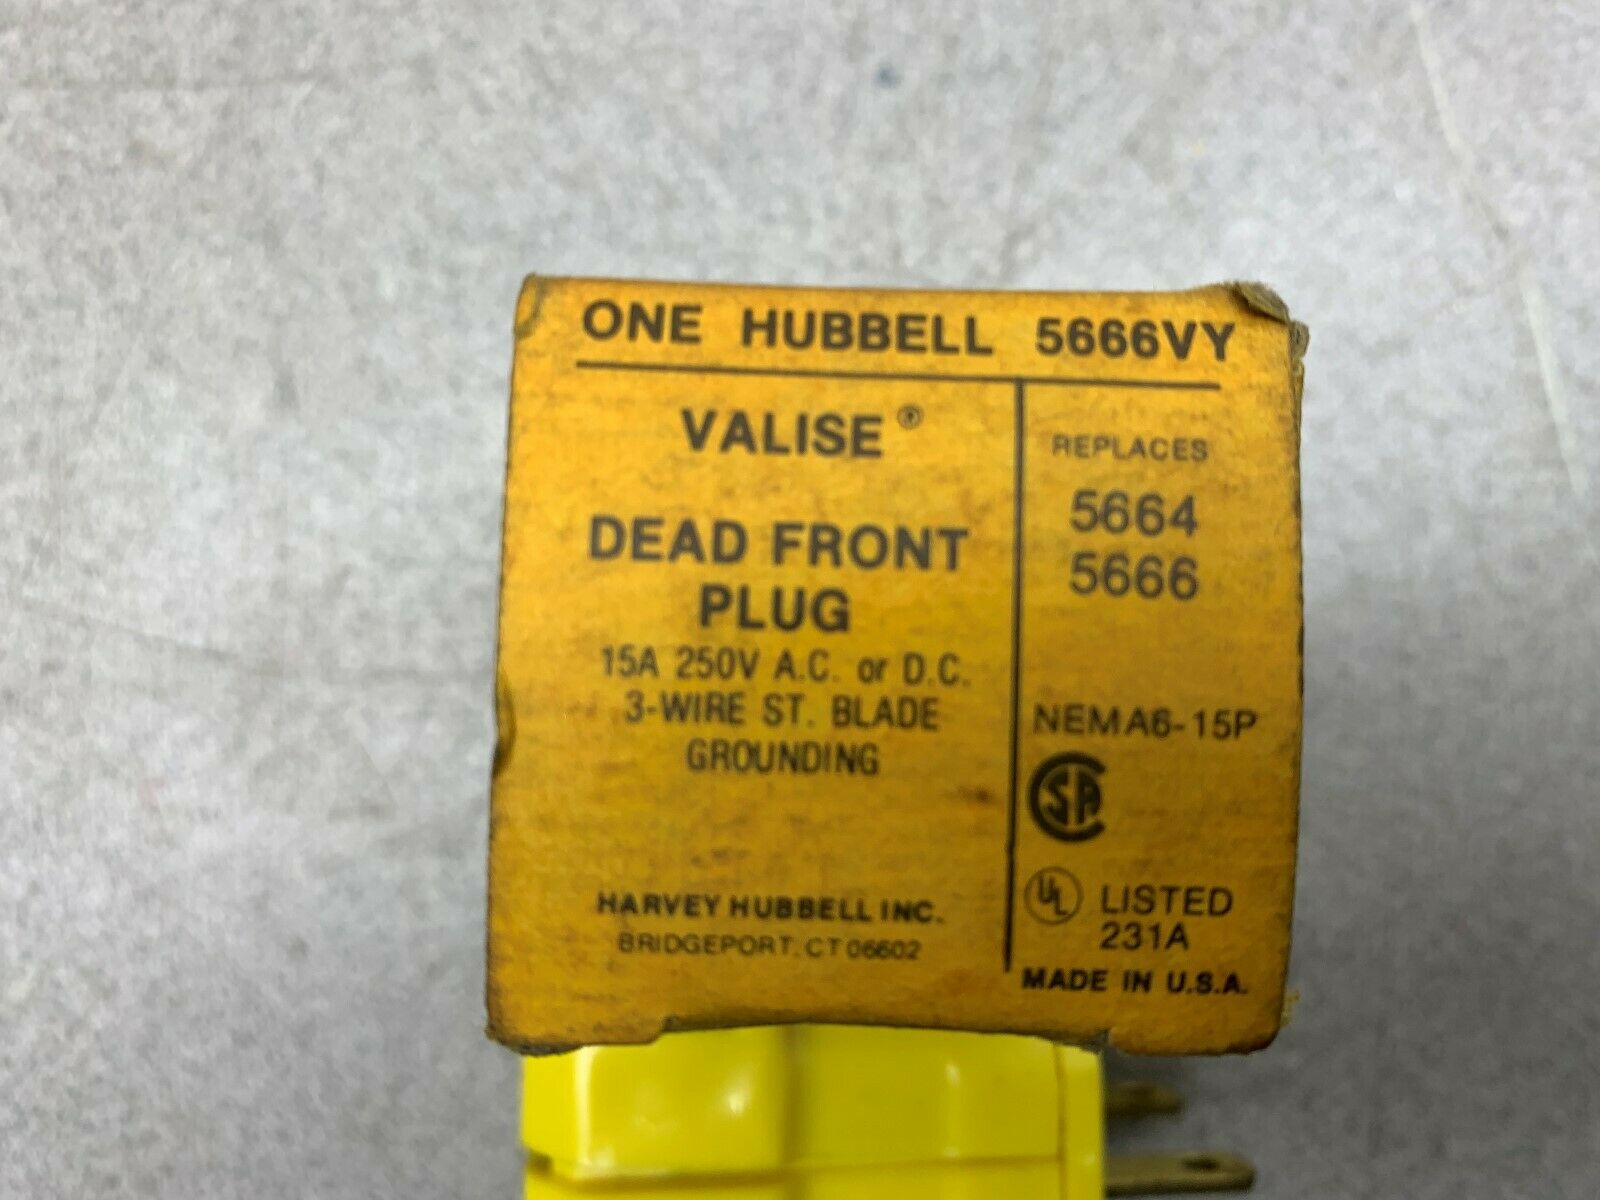 LOT OF 5 NEW IN BOX HUBBELL PLUG 5666VY